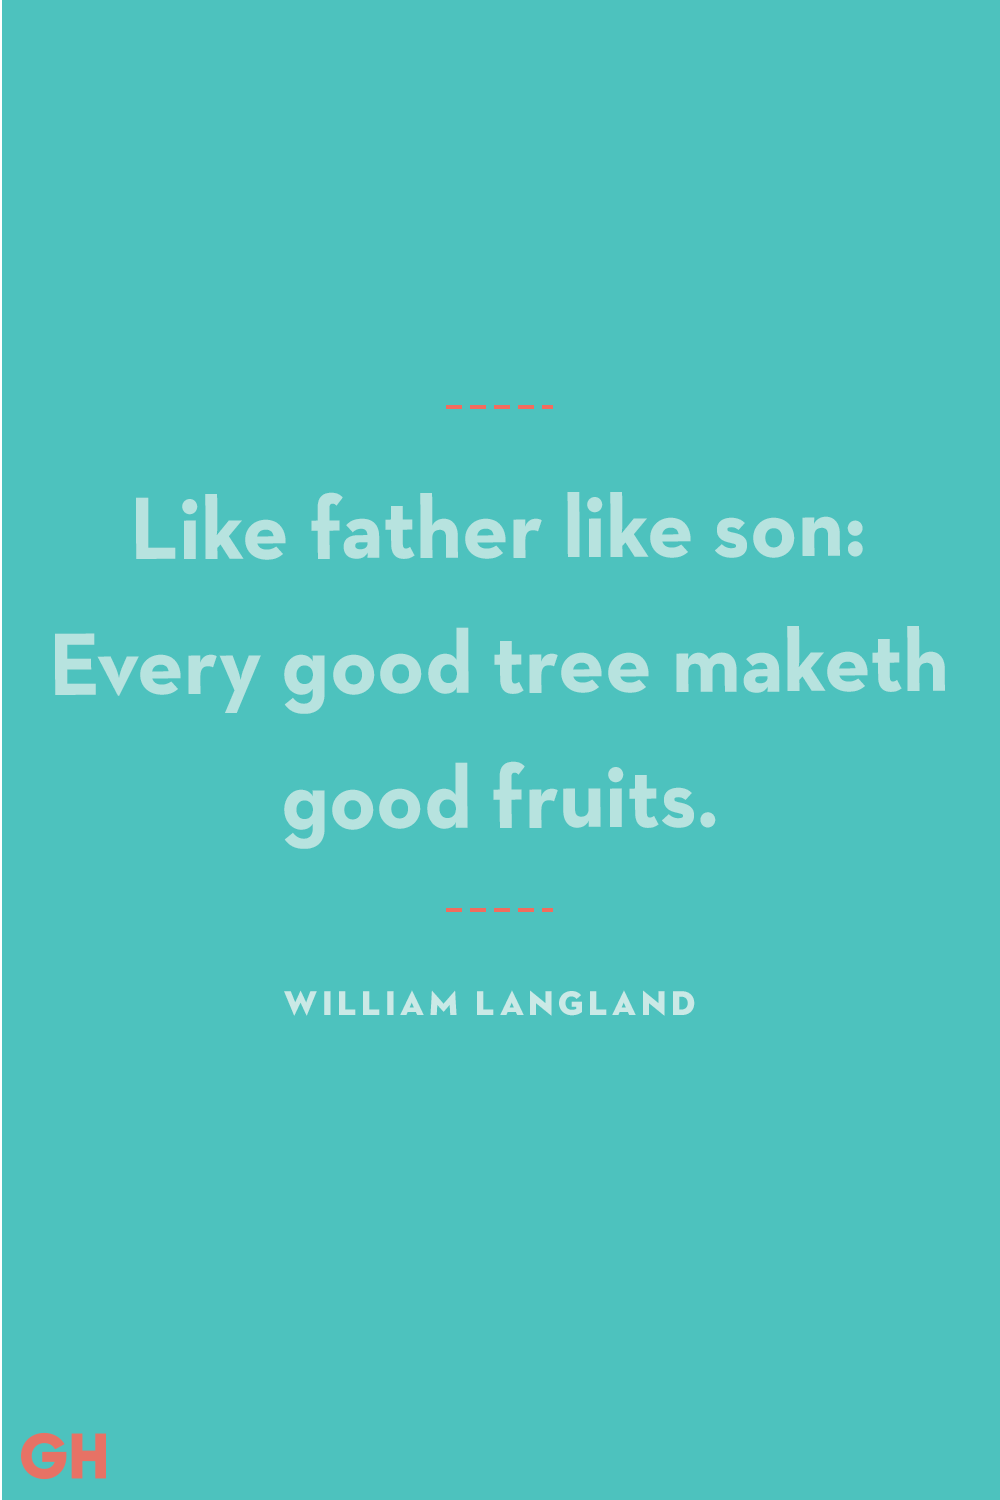 44 Best Father and Son Quotes - Quotes About Dad and Son Relationship